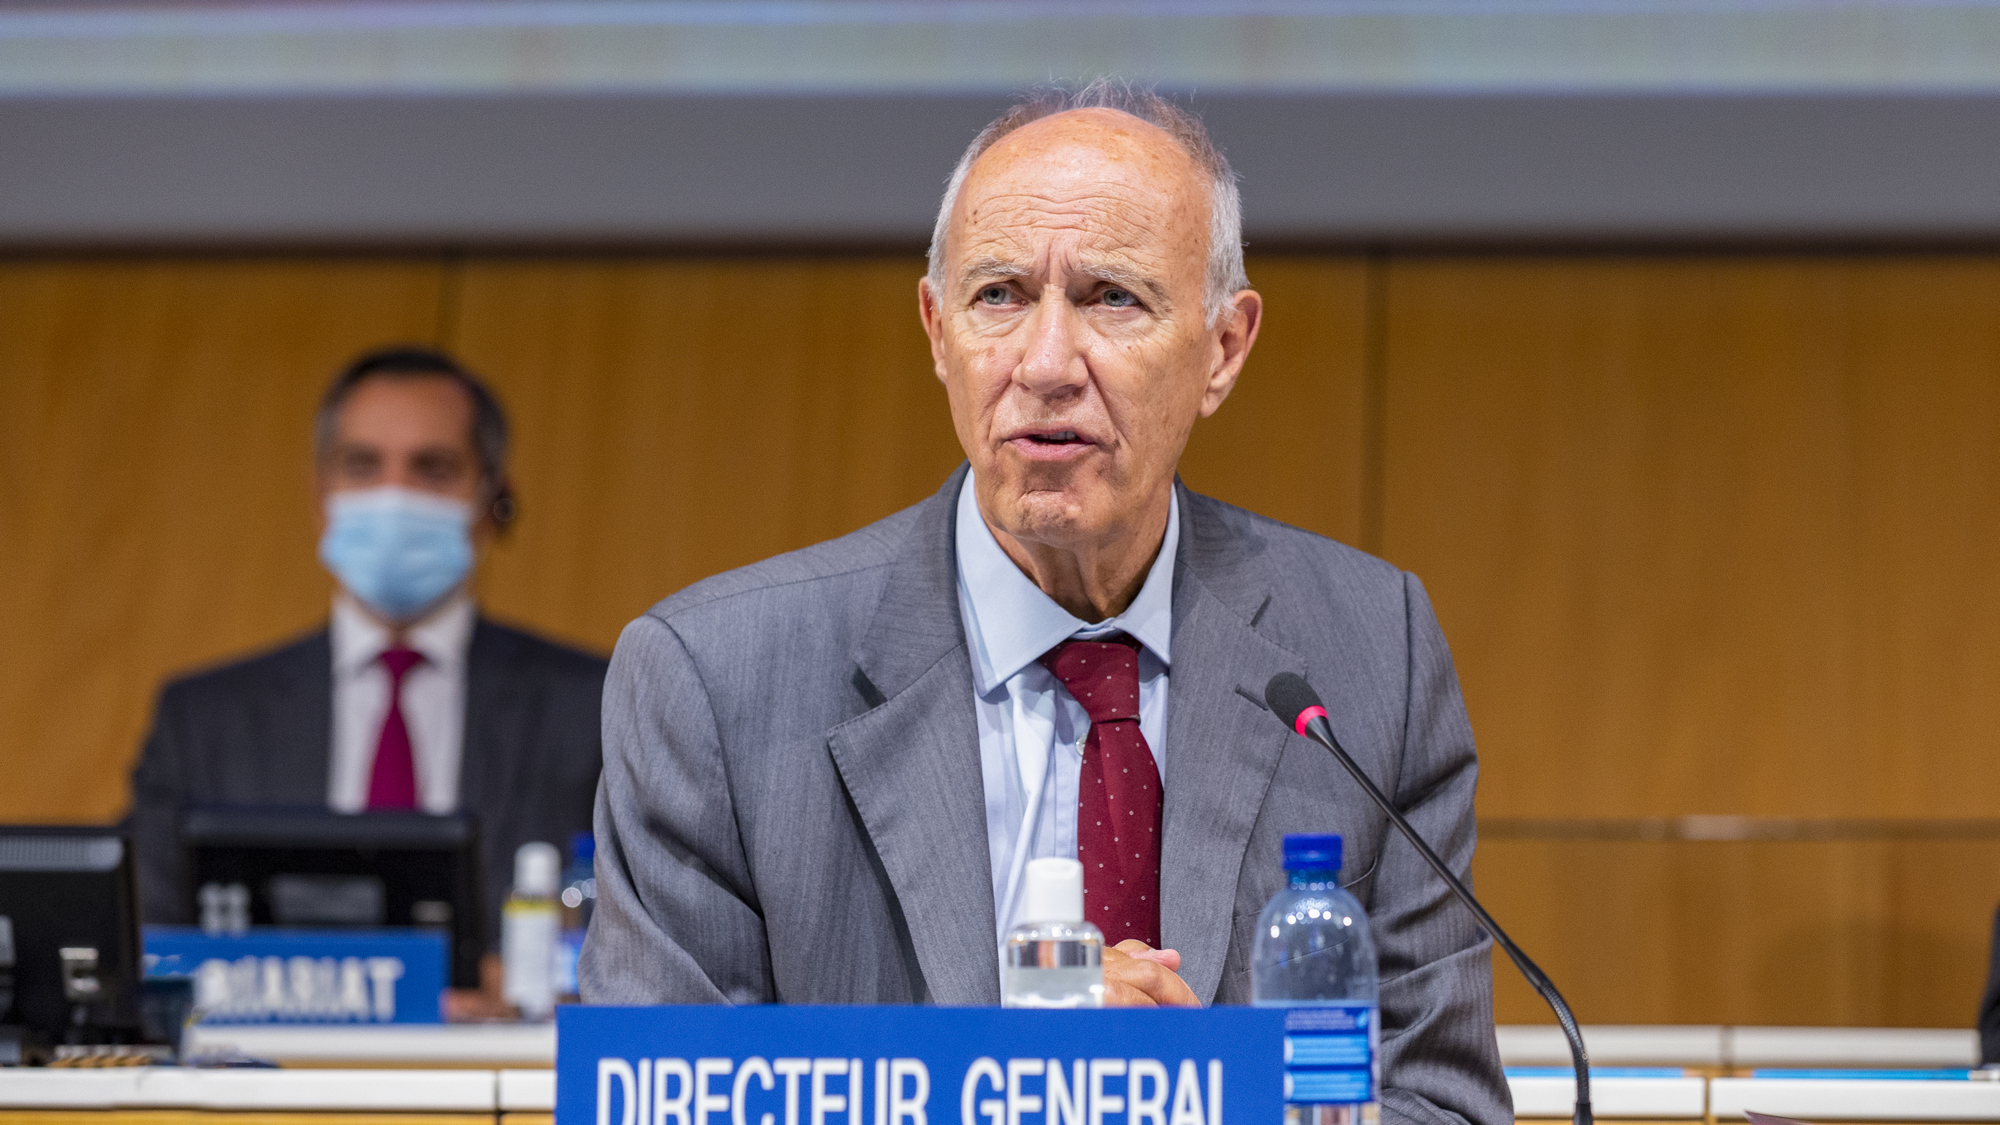 WIPO Director General Francis Gurry Opens WIPO Assemblies, Reports on Progress during 12-Year Tenure at Helm of the Organization